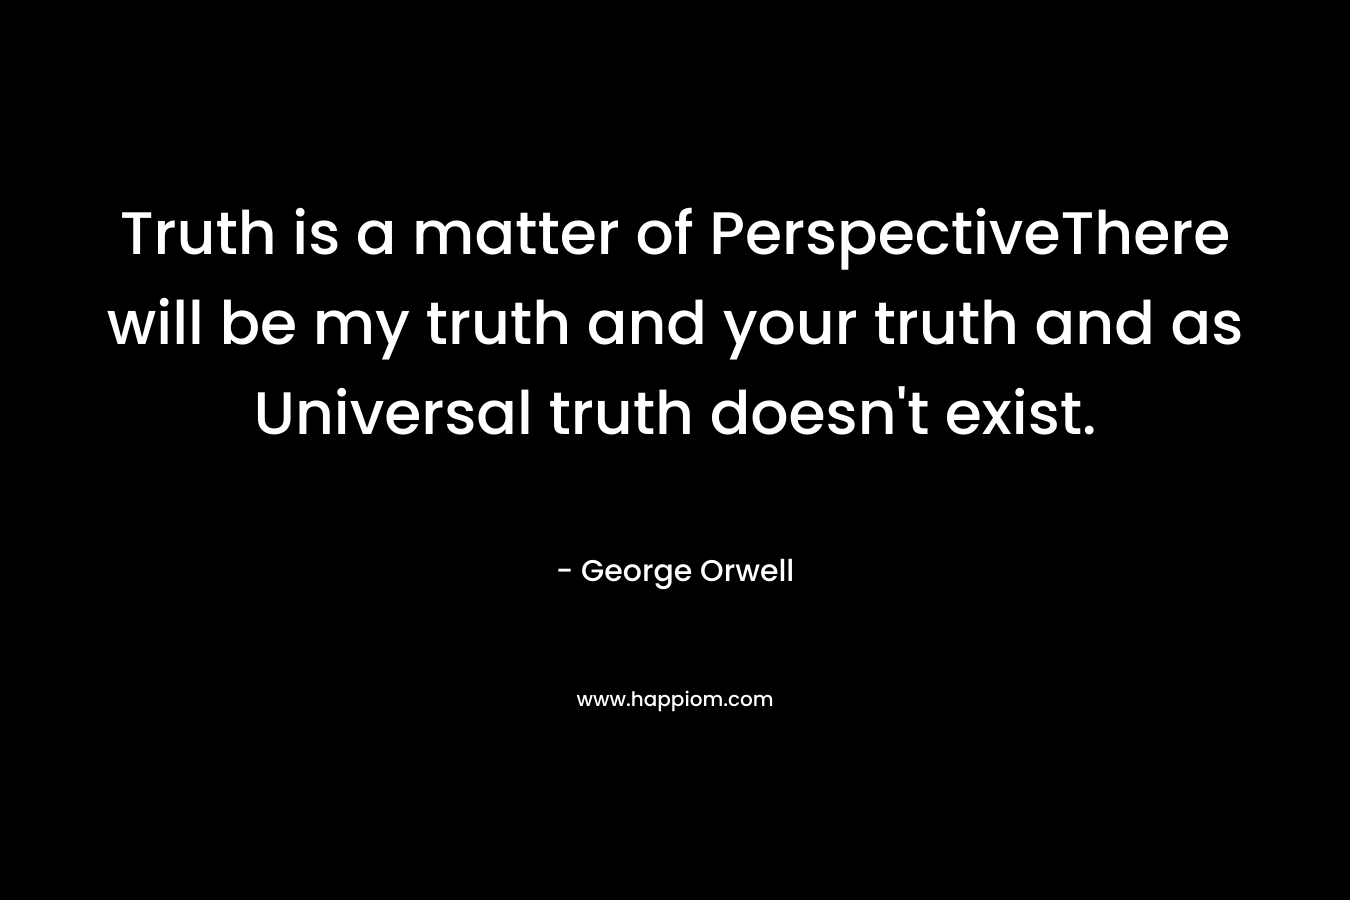 Truth is a matter of PerspectiveThere will be my truth and your truth and as Universal truth doesn't exist.